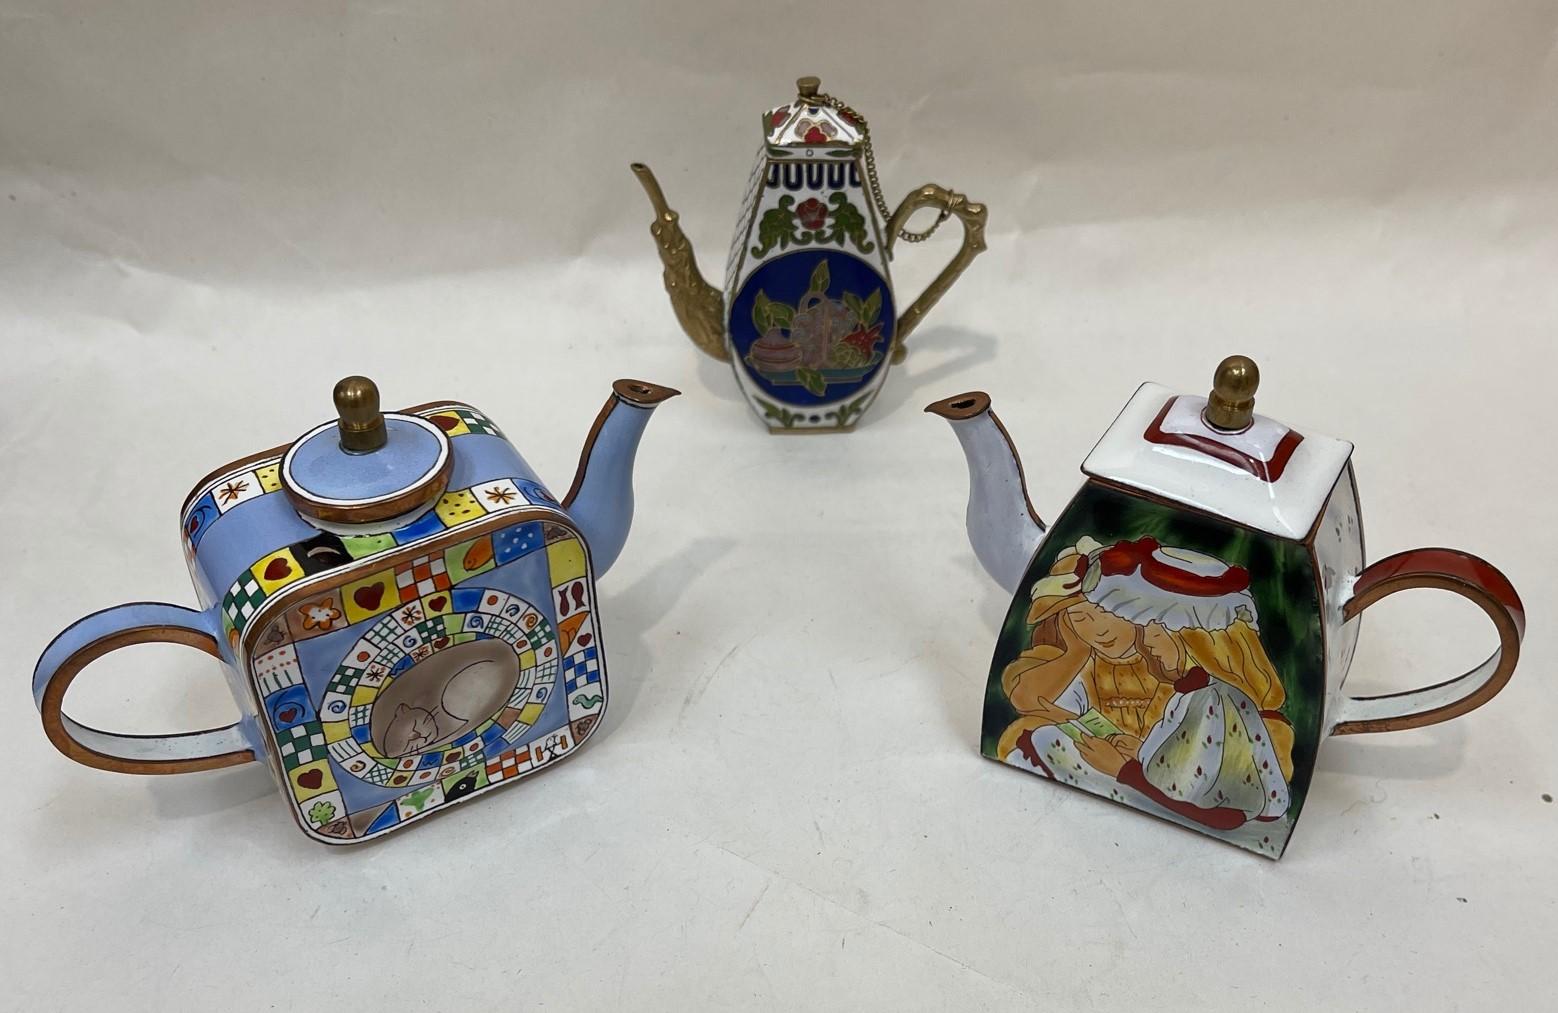 Collection of 3 Beautiful vintage Enamel Cloisonné Miniature teapots. Each mini teapot enameled on copper and hand painted. A perfect gift for a special someone!